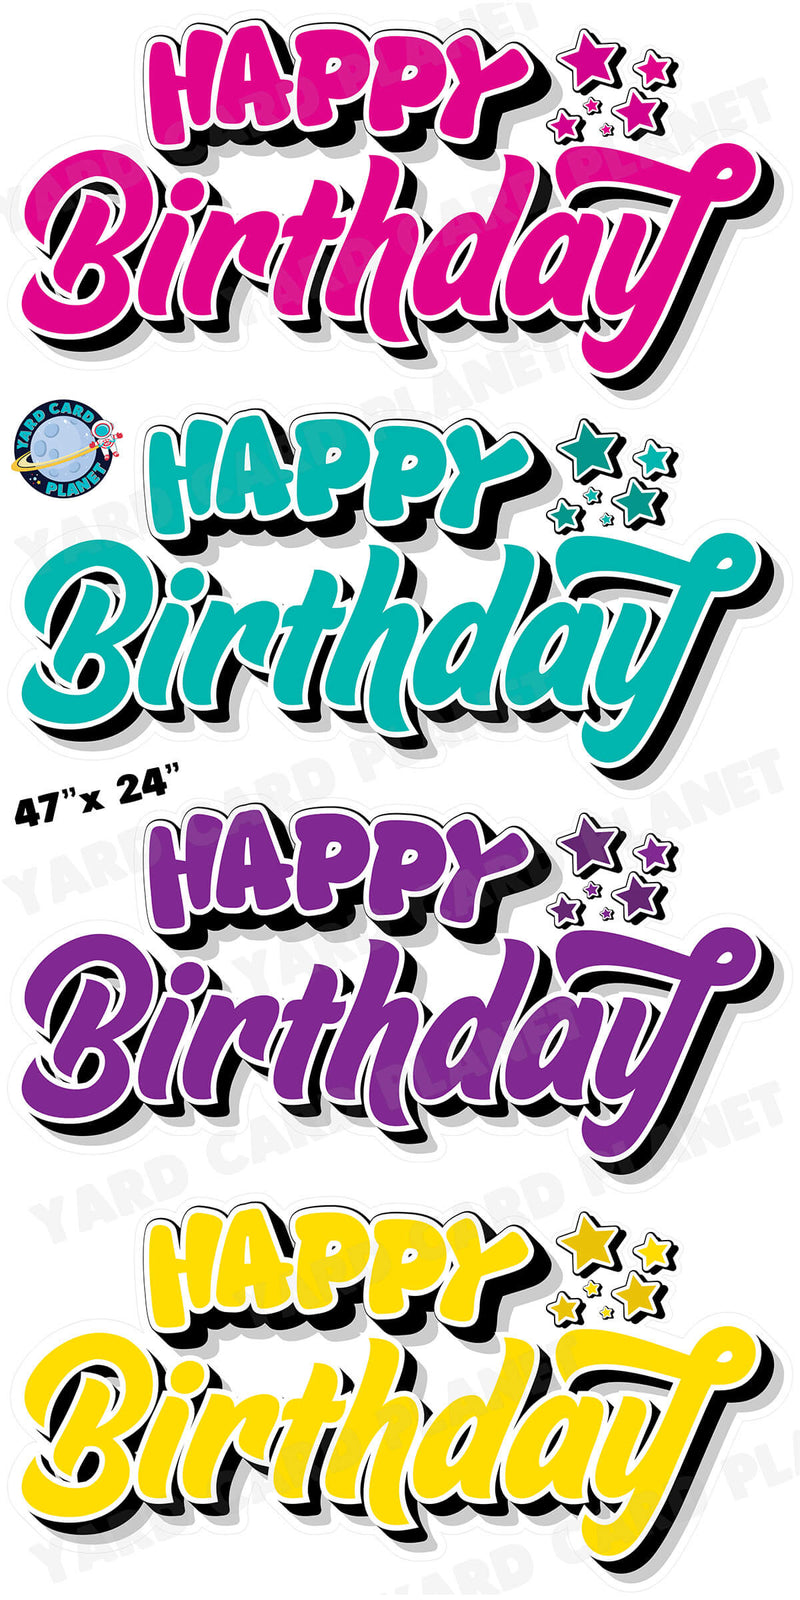 Happy Birthday EZ Quick Signs in Solid Hot Pink, Teal, Purple and Yellow Yard Card Set with Measurements